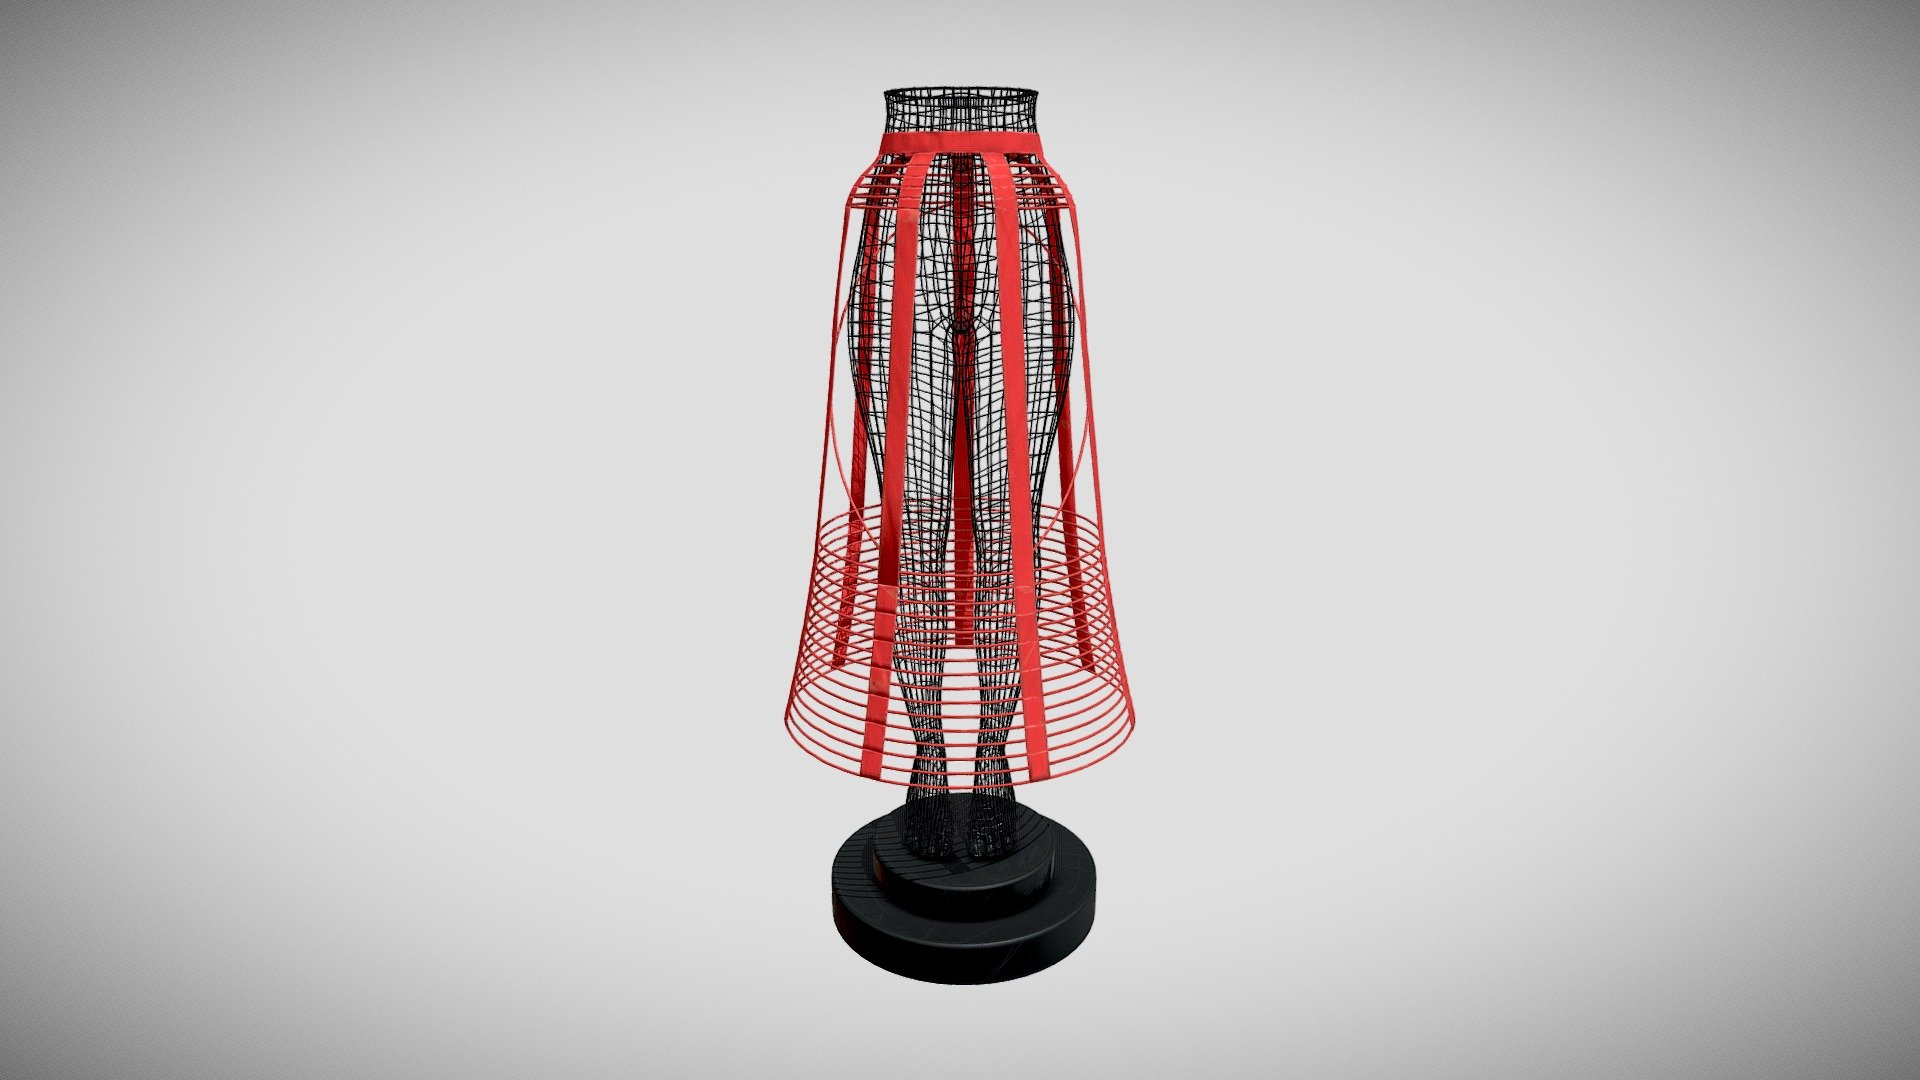 The 3D model presents a digital reconstruction of a historical crinoline - a special framework used to expand the fullness of the skirt in the mid 19th century. The crinoline is presented in a historical patent (U.S. Patent № 105124). It has 21 hoops and 7 ribbons. A new method of parameterisation was applied to reproduce the shape and construction of the hoops, ribbons and belt (for further details see https://doi.org/10.1080/00405000.2019.1621042). The authors of the 3D model are

Aleksei Moskvin https://independent.academia.edu/AlekseiMoskvin

Mariia Moskvina https://independent.academia.edu/MariiaMoskvina

(Saint Petersburg State University of Industrial Technologies and Design)

DOI: http://dx.doi.org/10.13140/RG.2.2.11733.35049

The authors thank Prof. Victor Kuzmichev from Ivanovo State Polytechnic University for his important contribution to this reconstruction 3d model